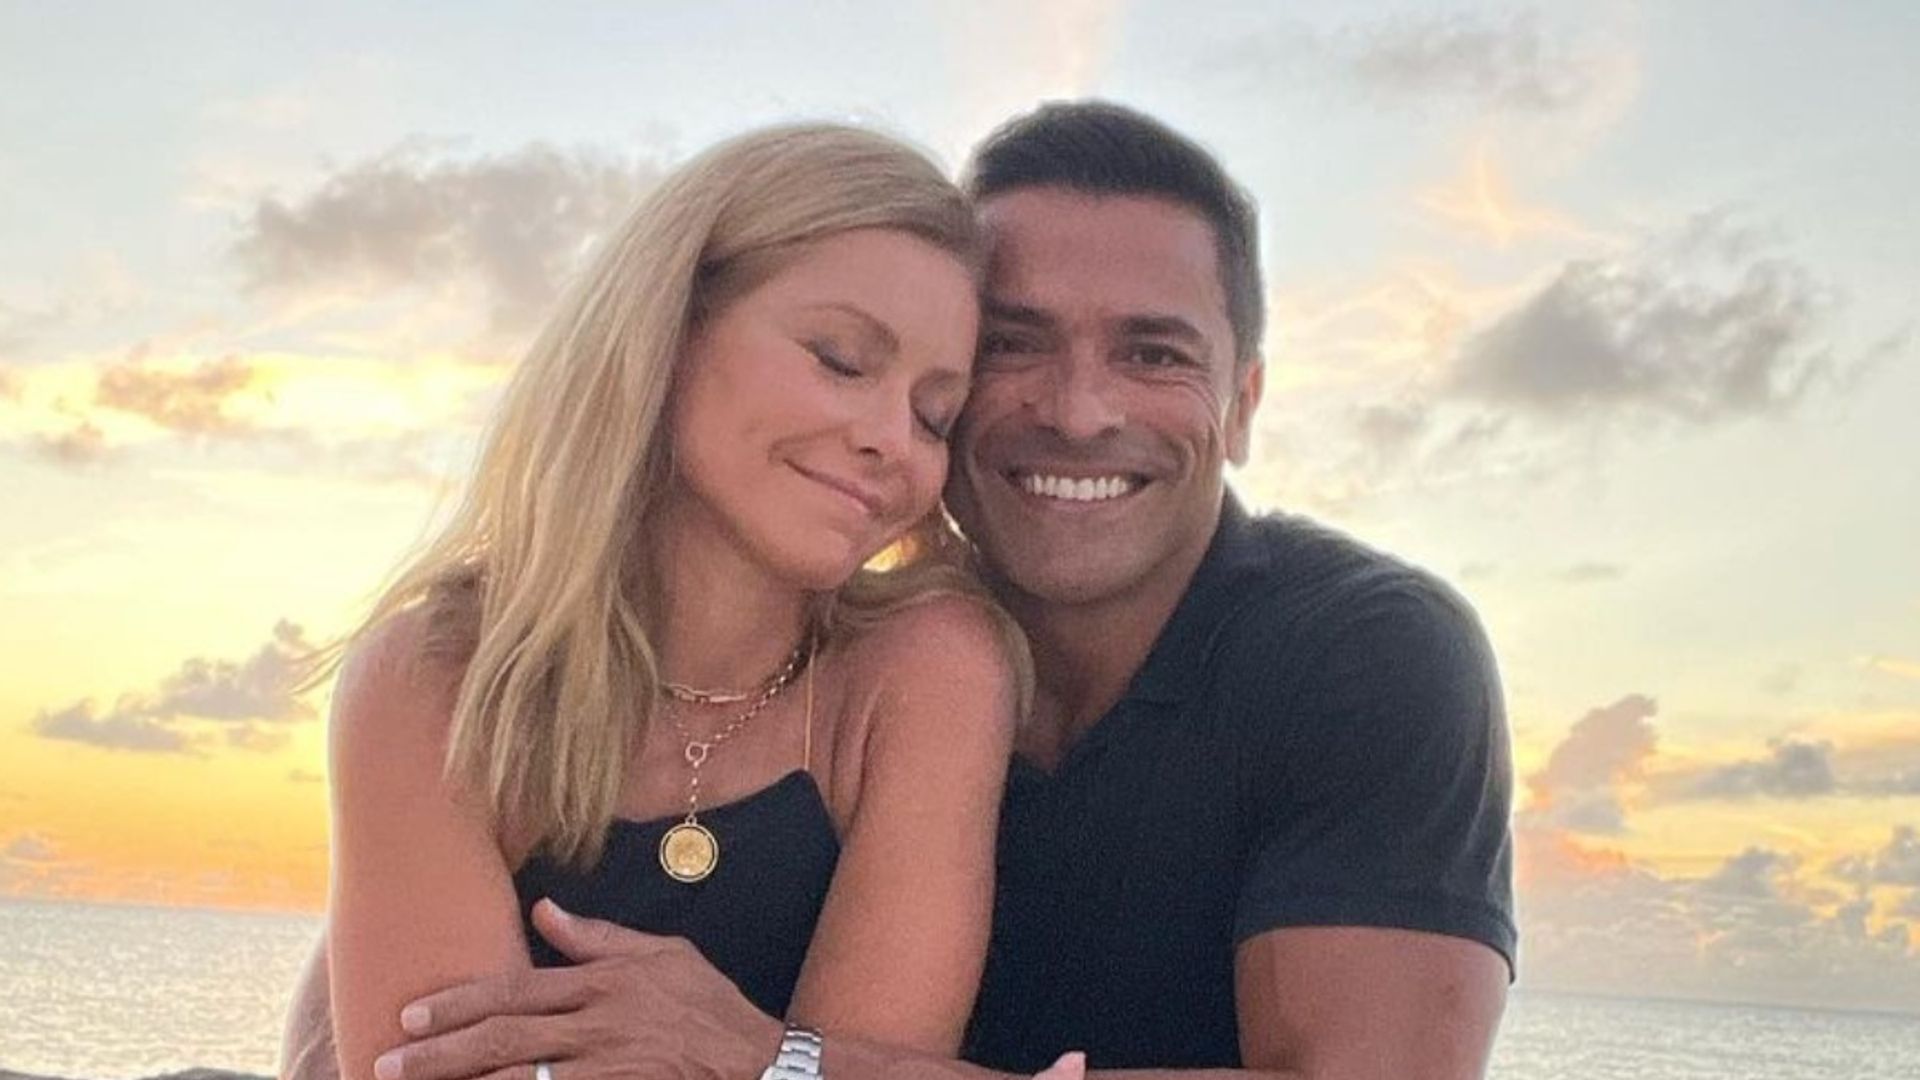 Kelly Ripa and Mark Consuelos get fans talking with romantic date night picture